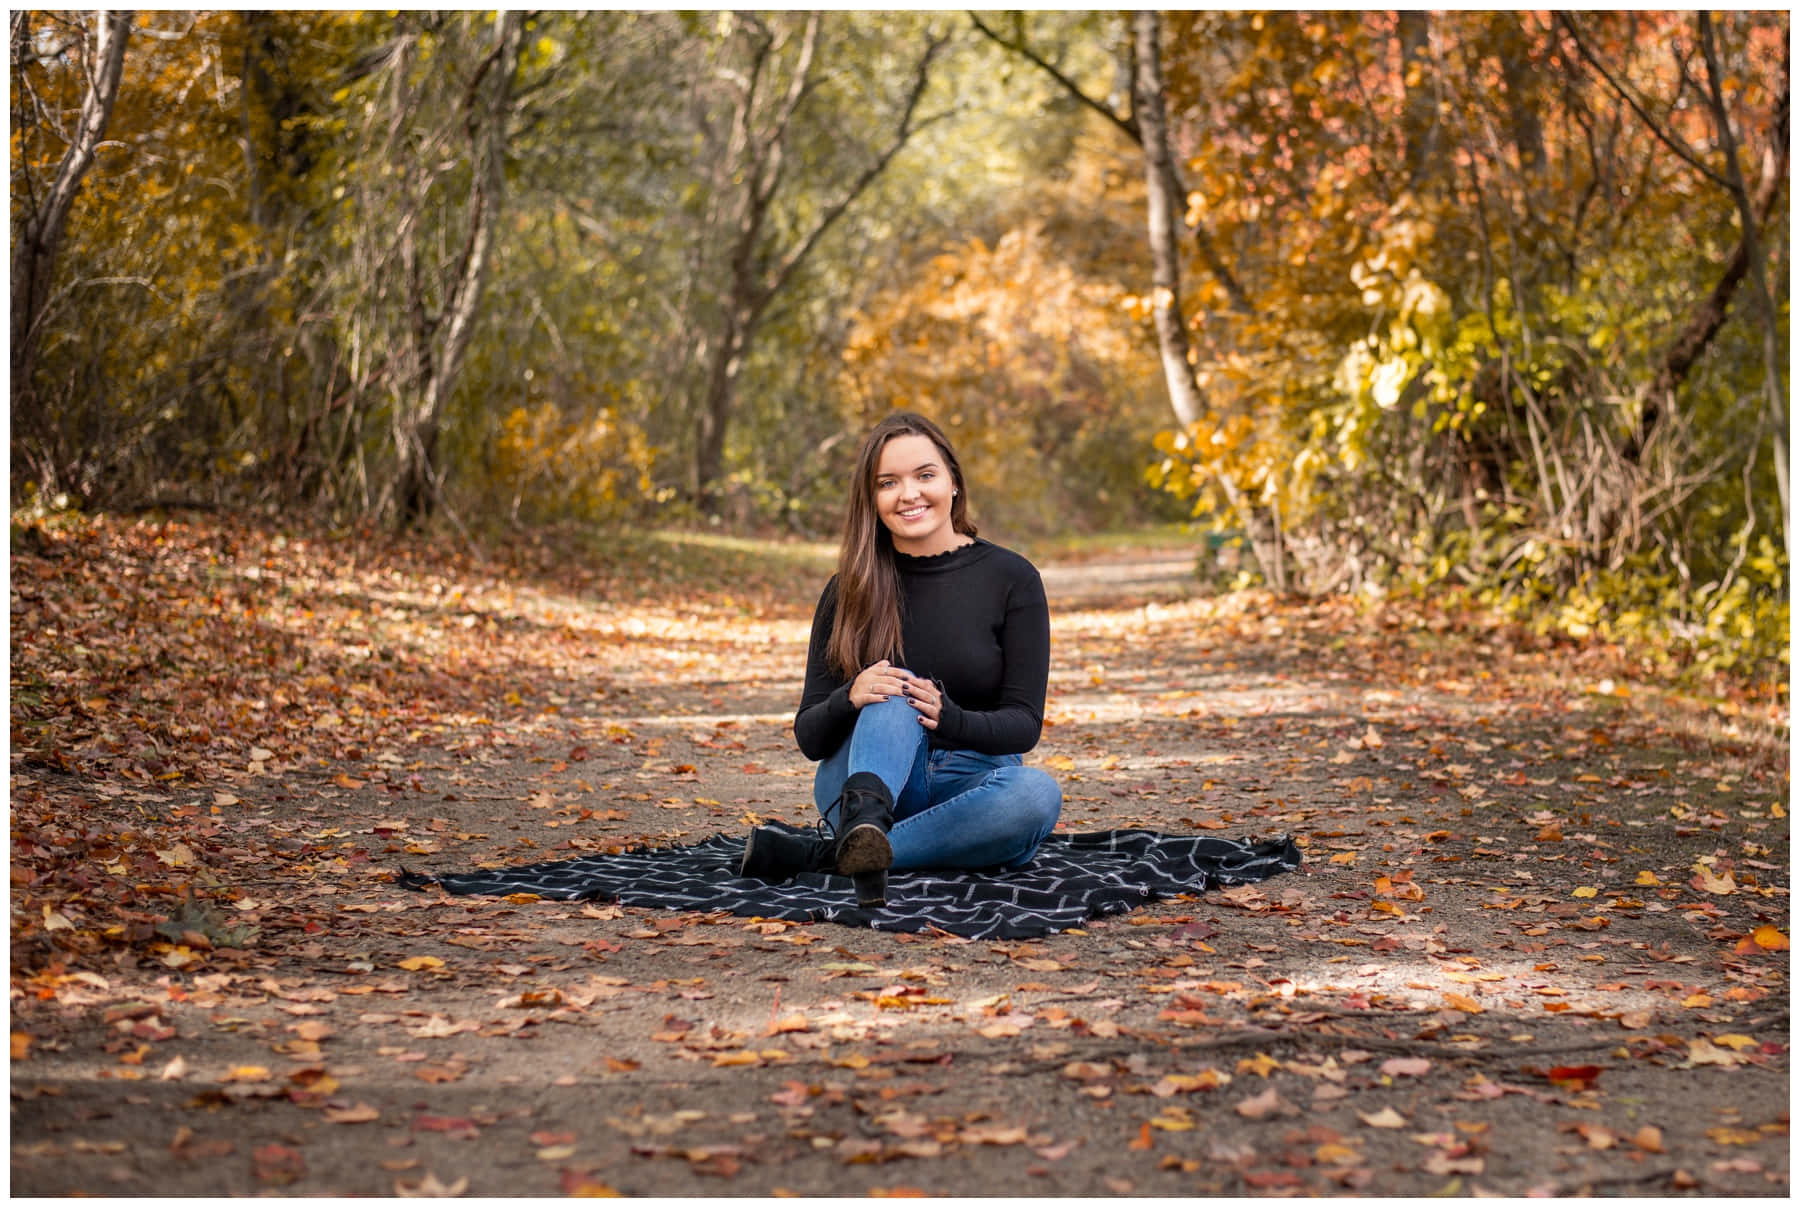 Laughing with joy during Fall Senior Pictures